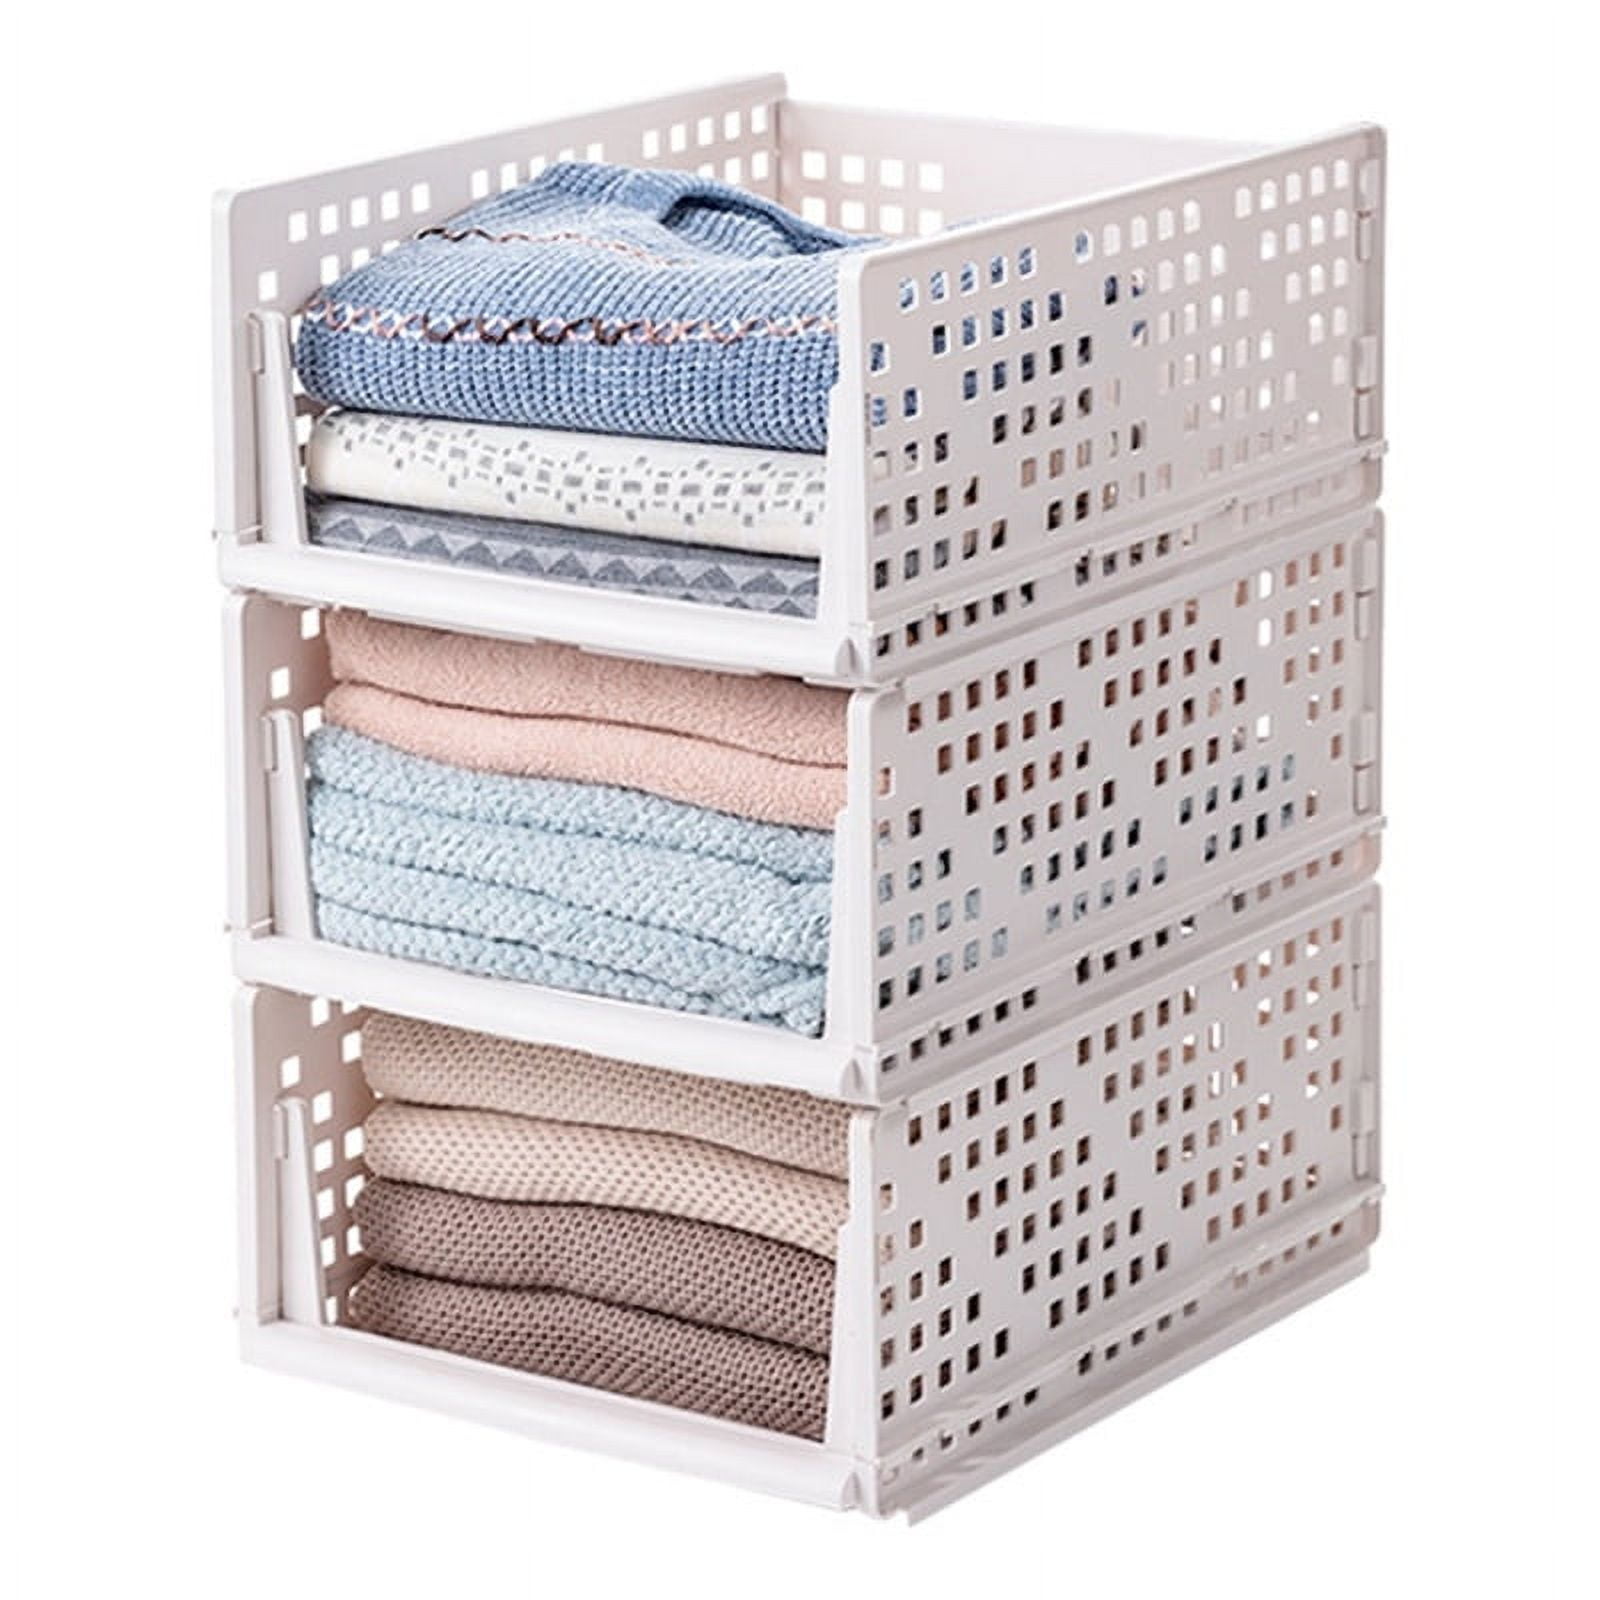 Folding and Stackable Storage Plastic Shelf in White Set of 4 - Walmart.com